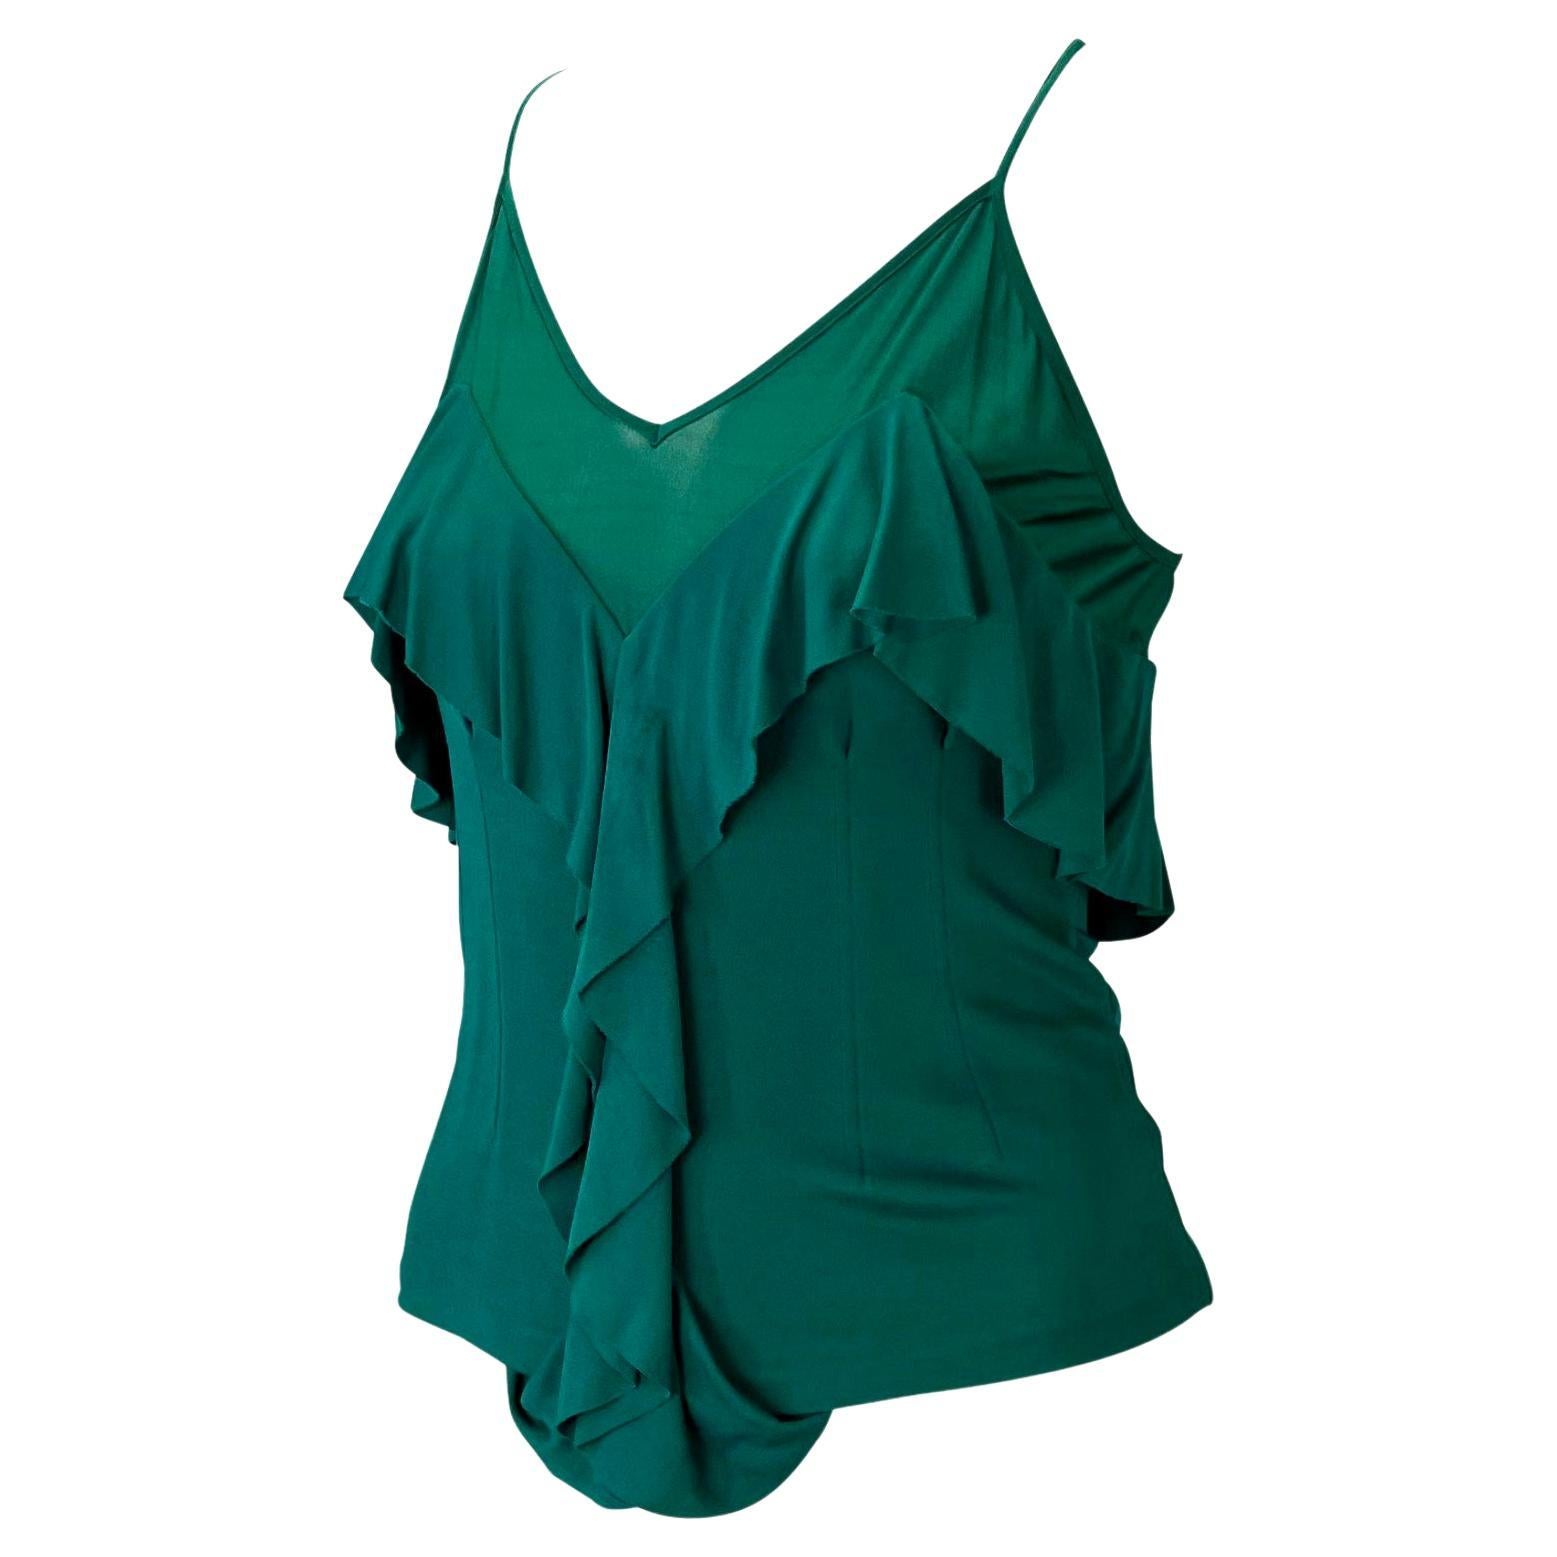 F/W 2003 Yves Saint Laurent by Tom Ford Teal Green Sheer Ruffle Tank Top In Excellent Condition For Sale In West Hollywood, CA